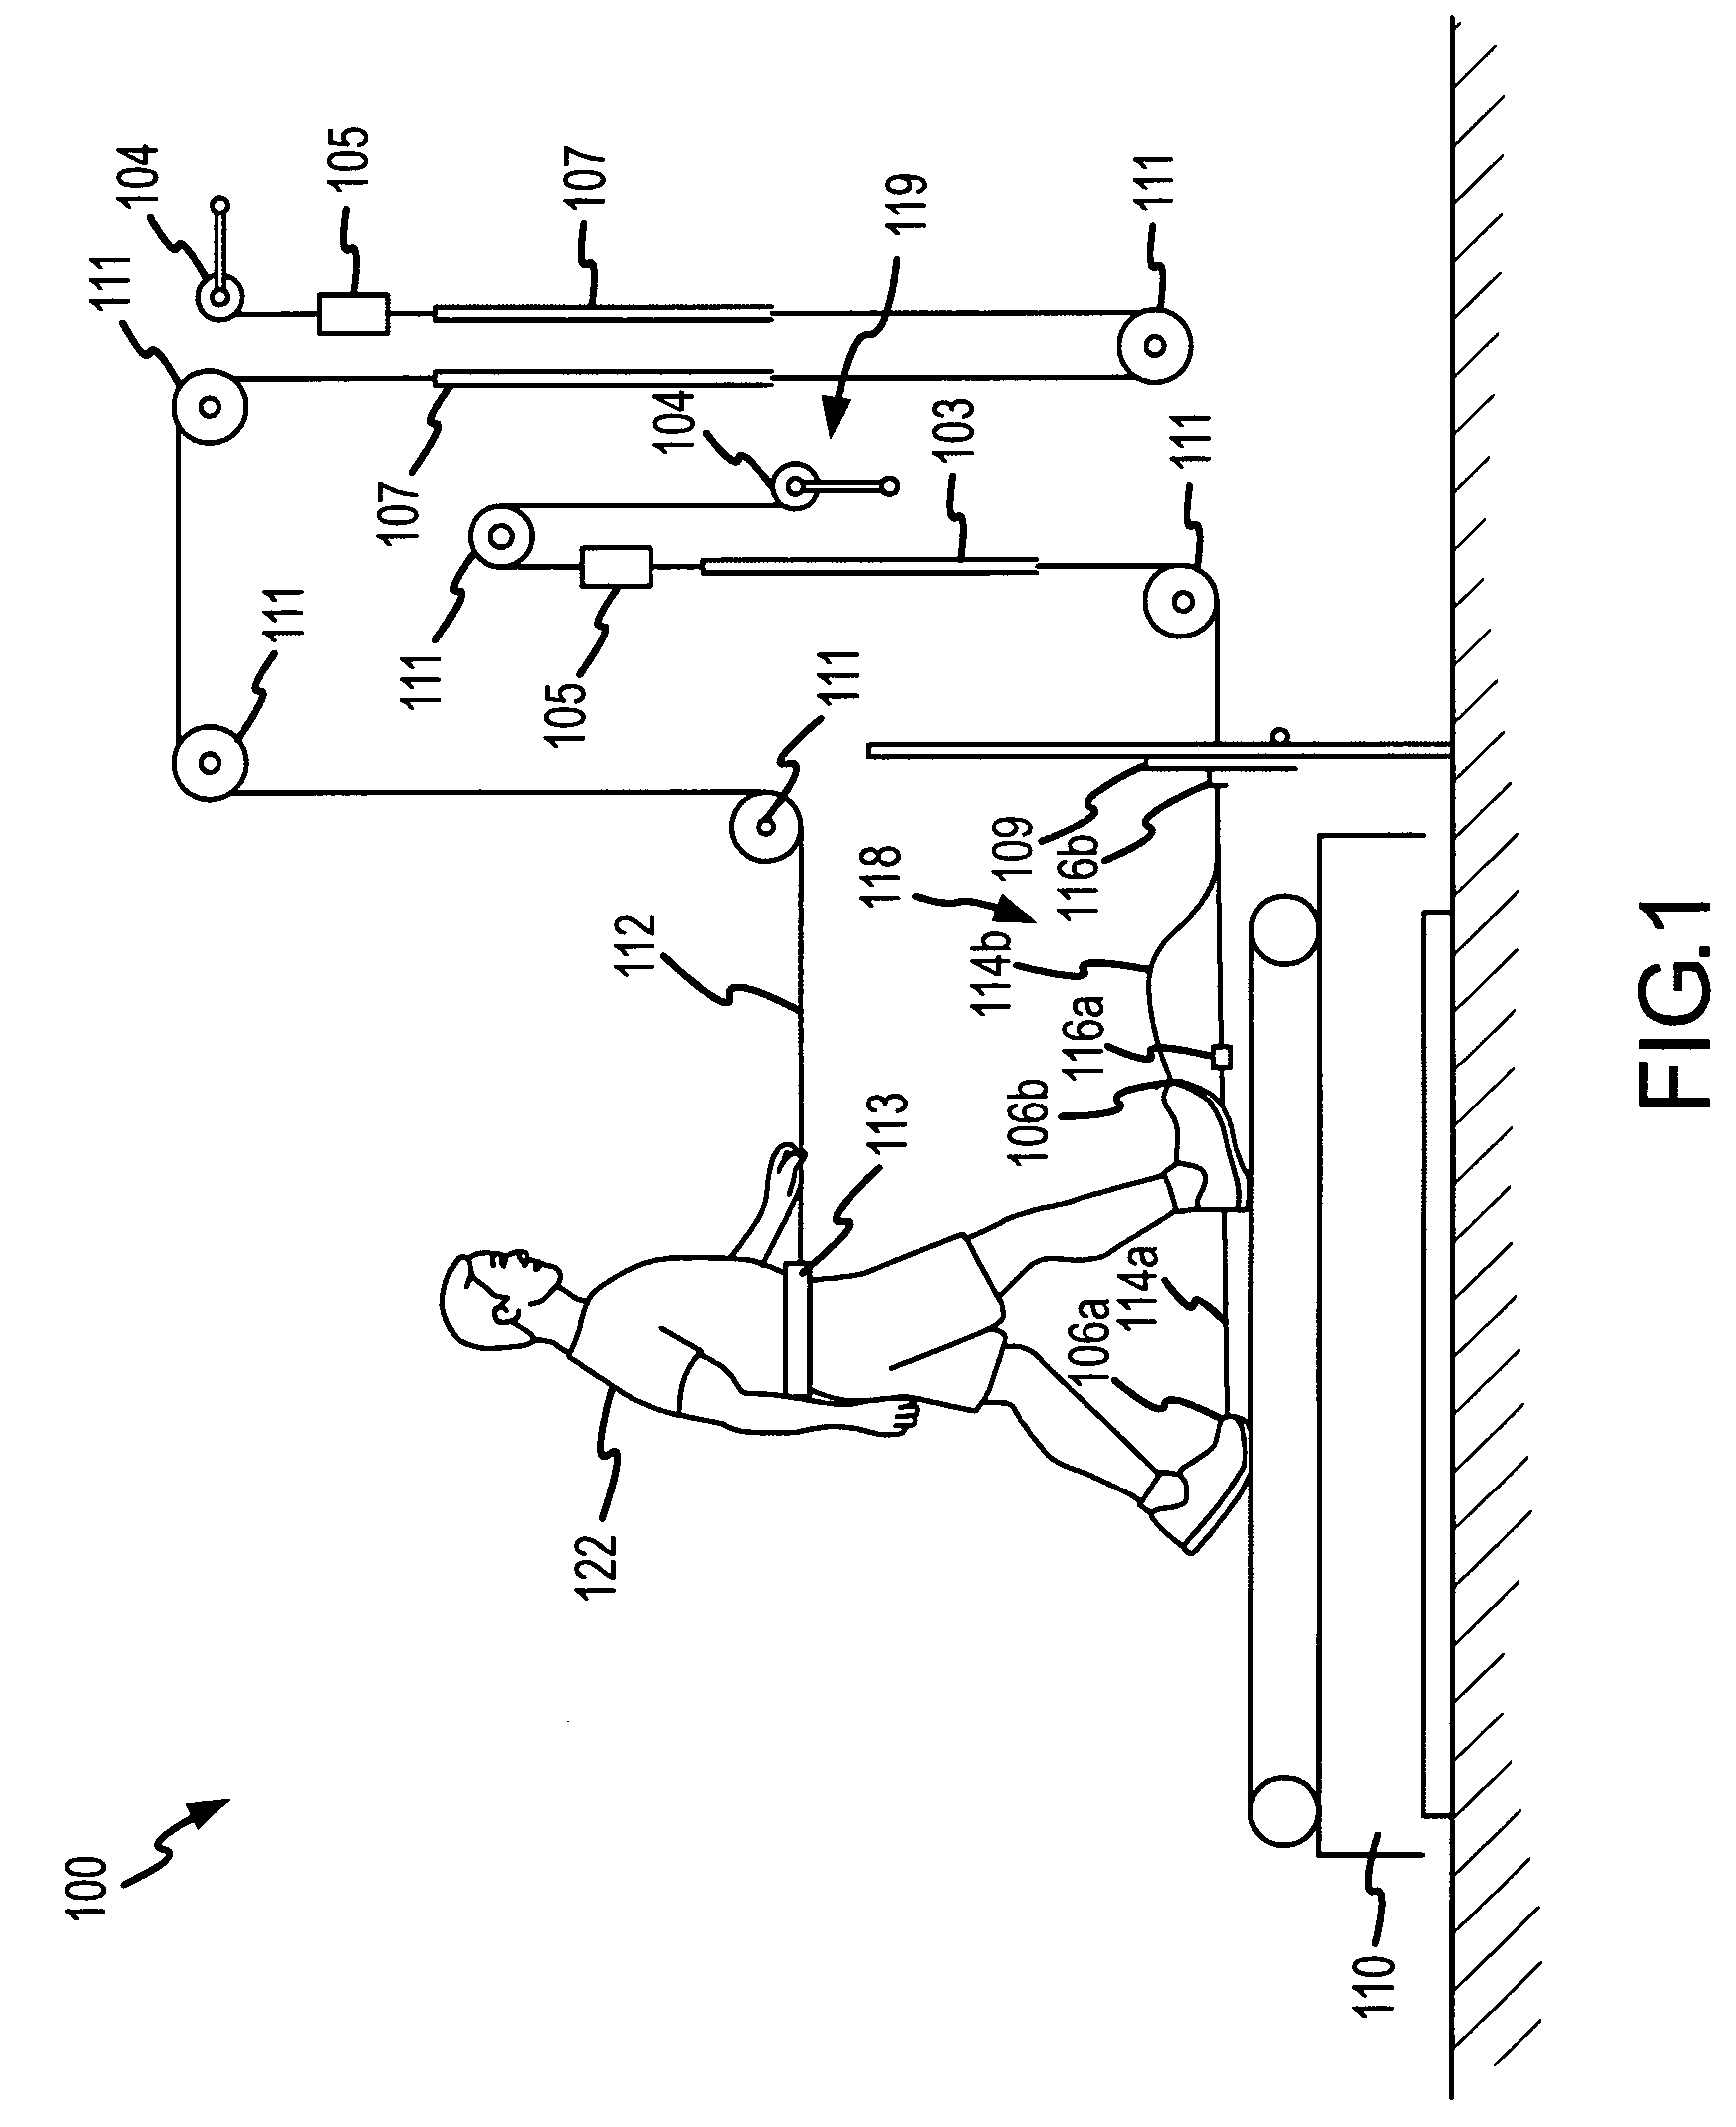 Force assistance device for walking rehabilitation therapy